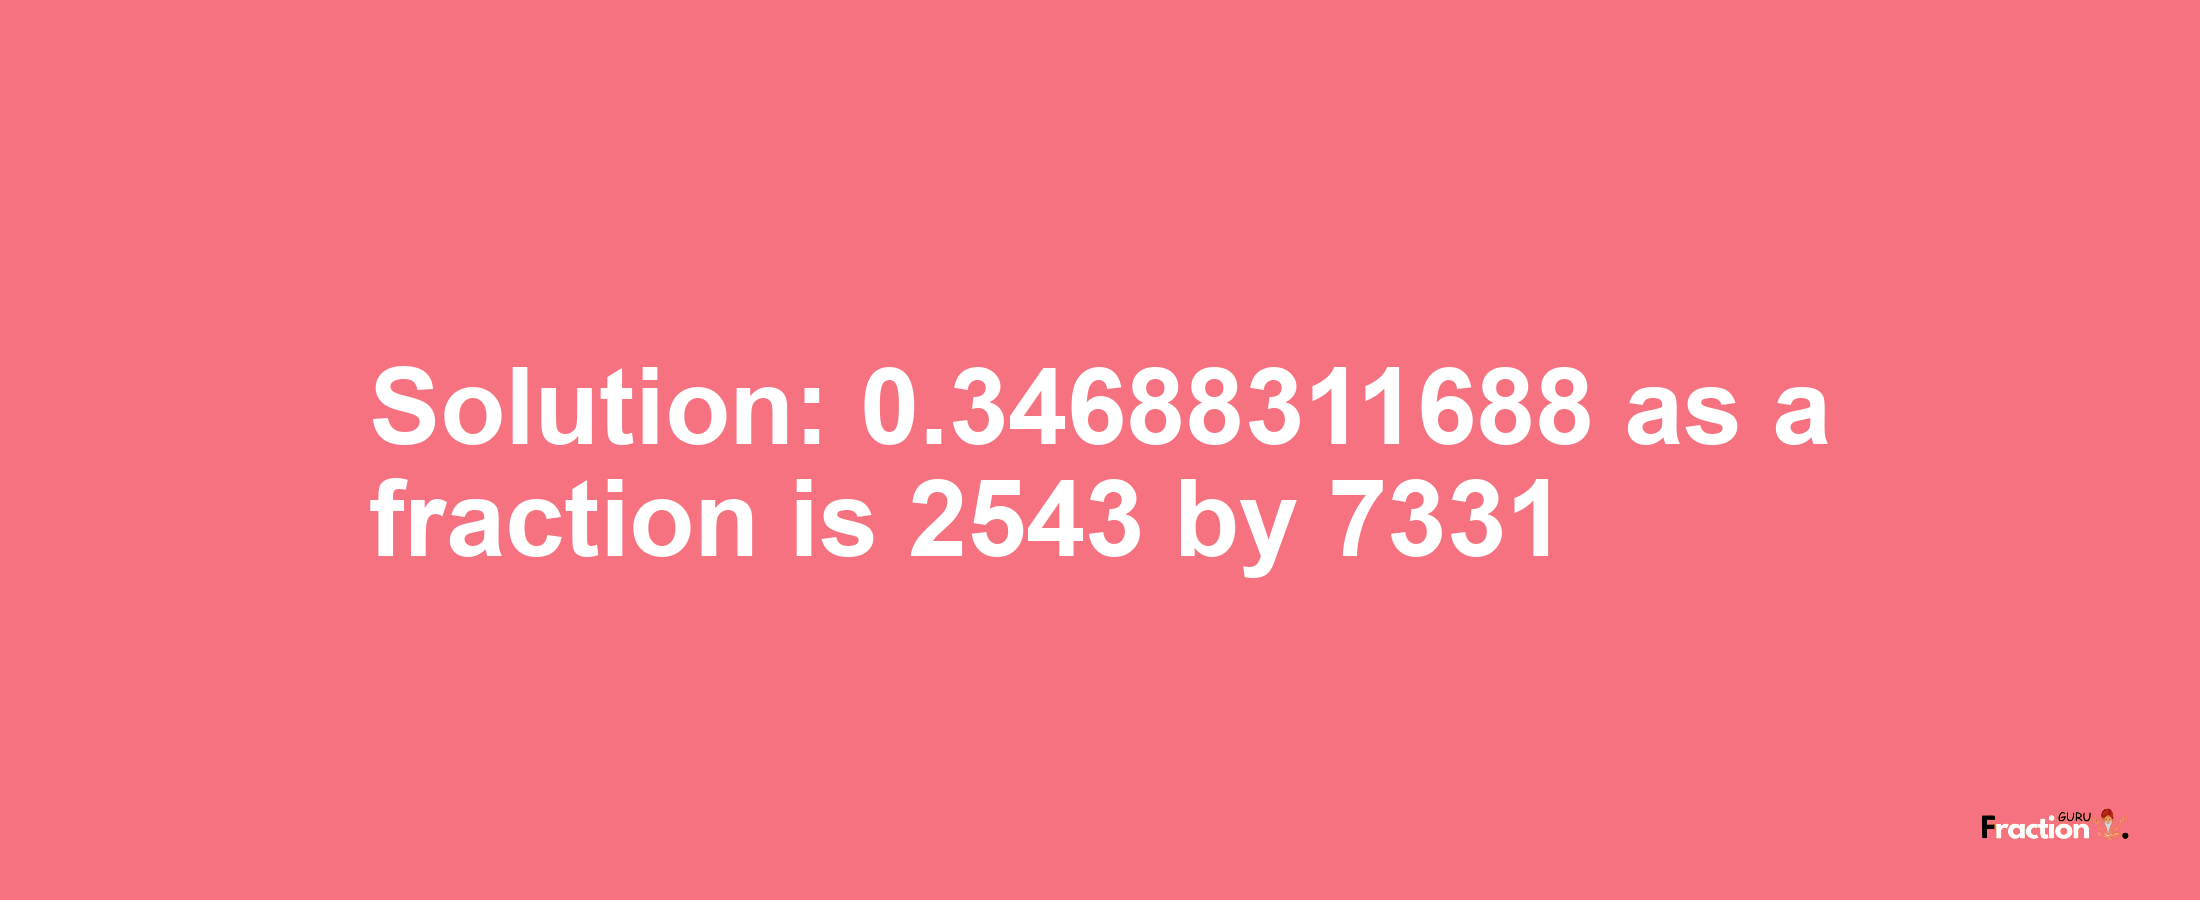 Solution:0.34688311688 as a fraction is 2543/7331